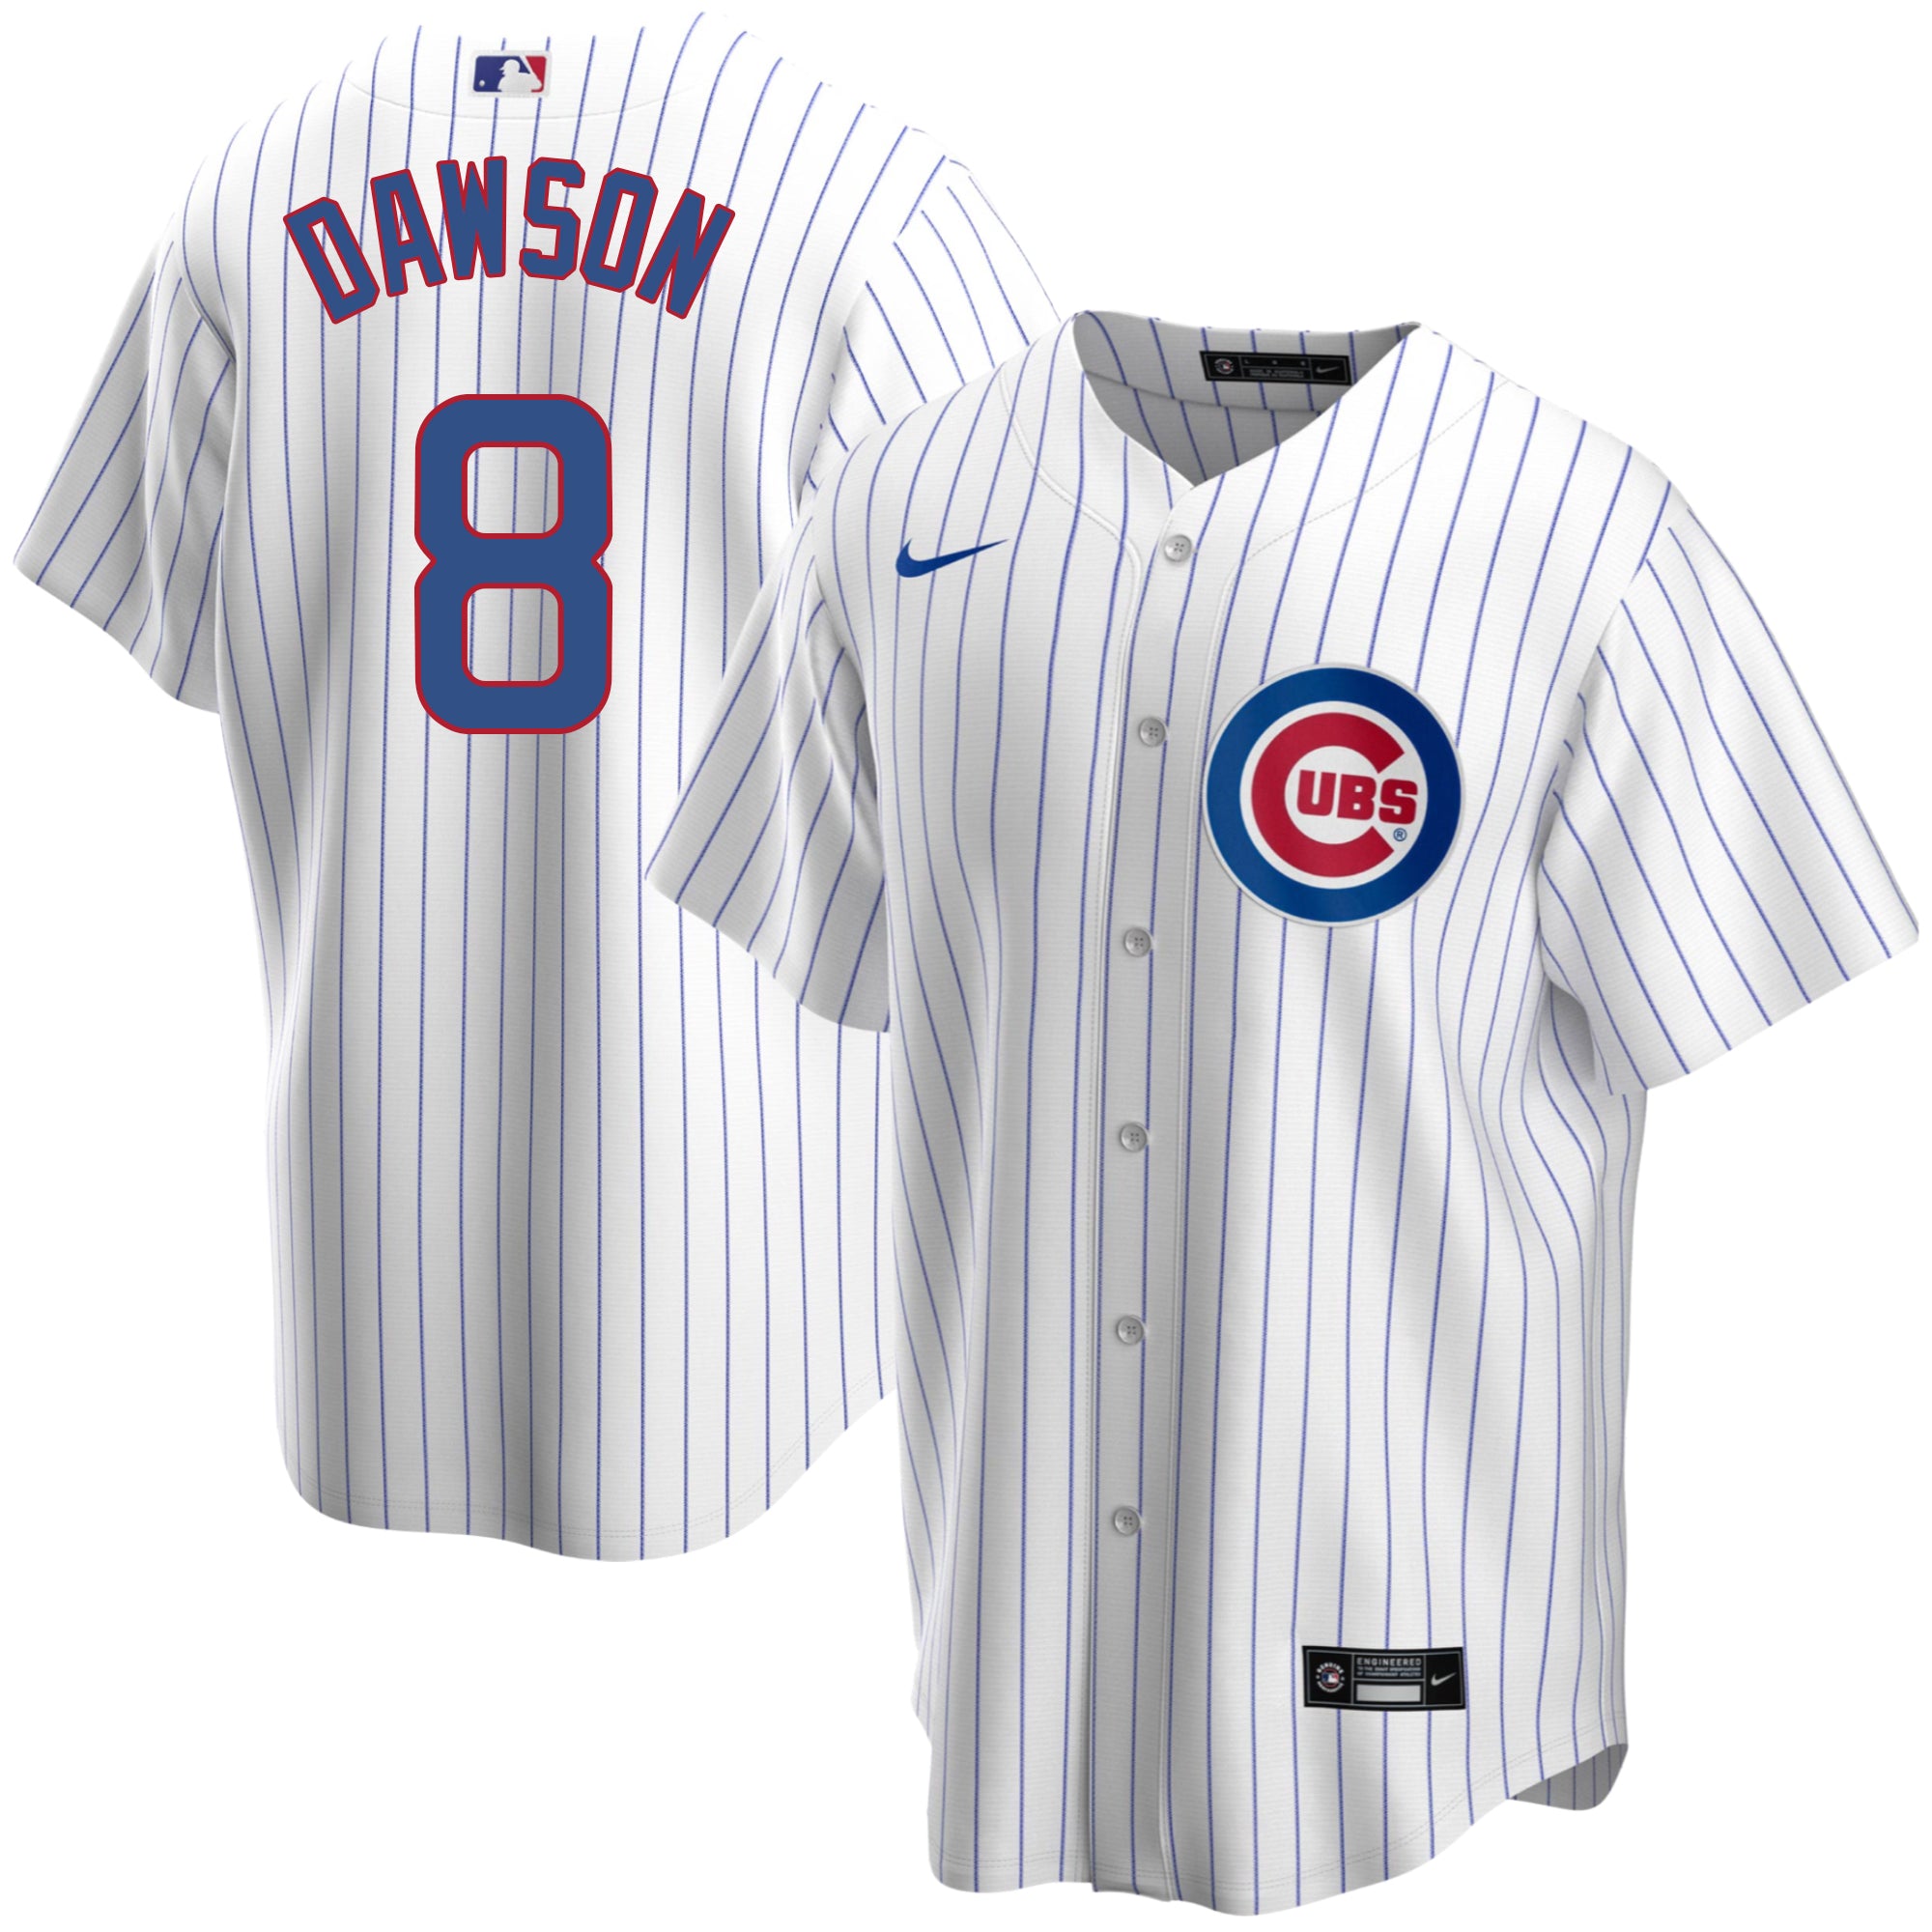 Authentic! Majestic, 56 3XL CHICAGO CUBS PINSTRIPE, ANDRE DAWSON